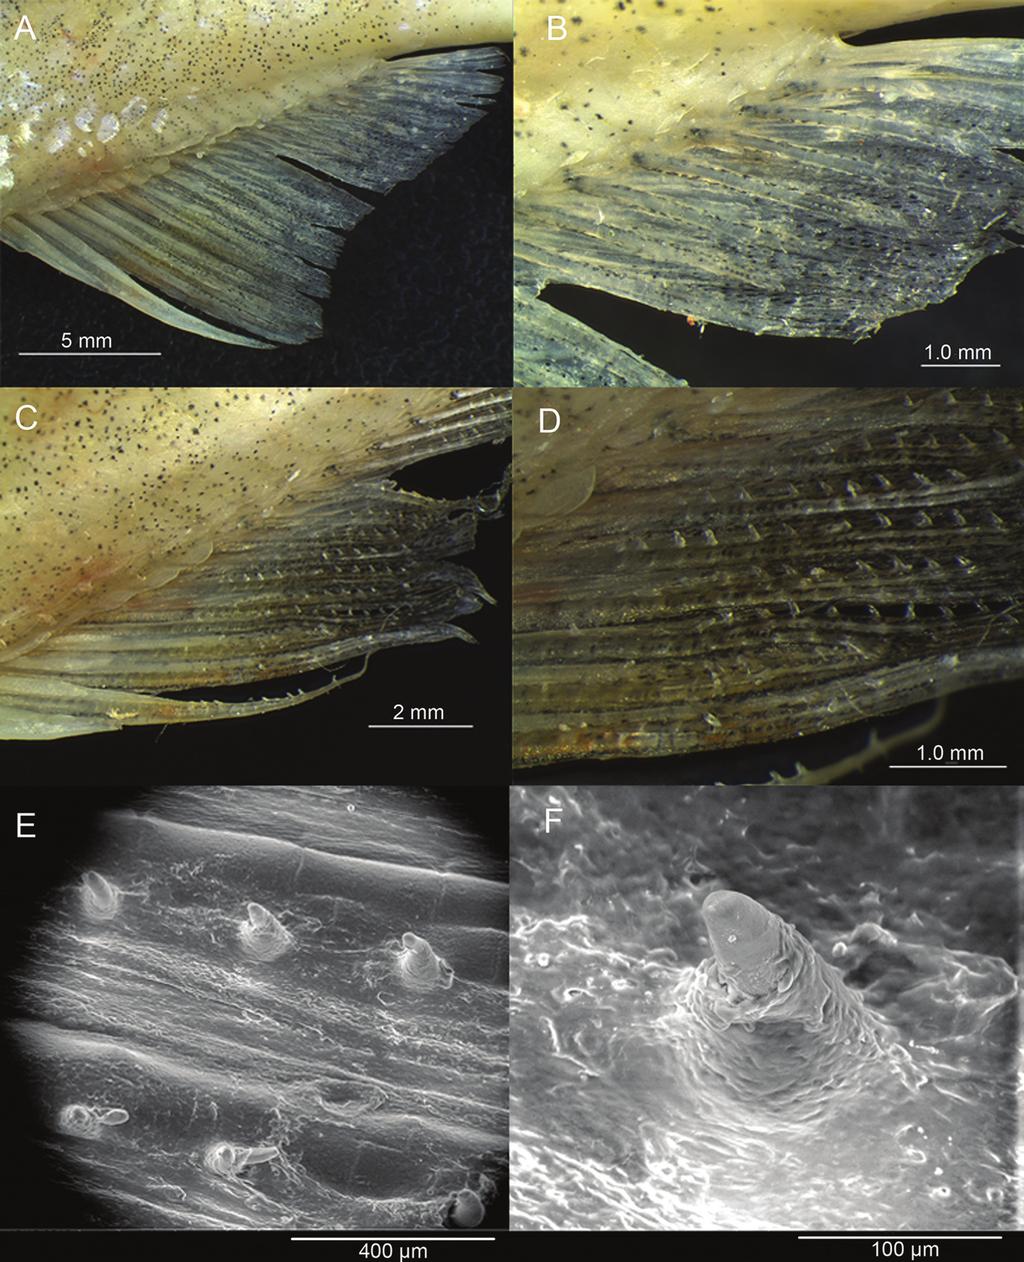 Speciation in Astyanax scabripinnis species complex 434 Fig. 4. Details for the anal fin of male of A. aff. scabripinnis with and without hooks. A: Anal fin of male from Ribeirão Grande (662 m a.s.l.); B: detail of fin without hooks; C: Anal fin of male from Ribeirão Grande (1850 m a.